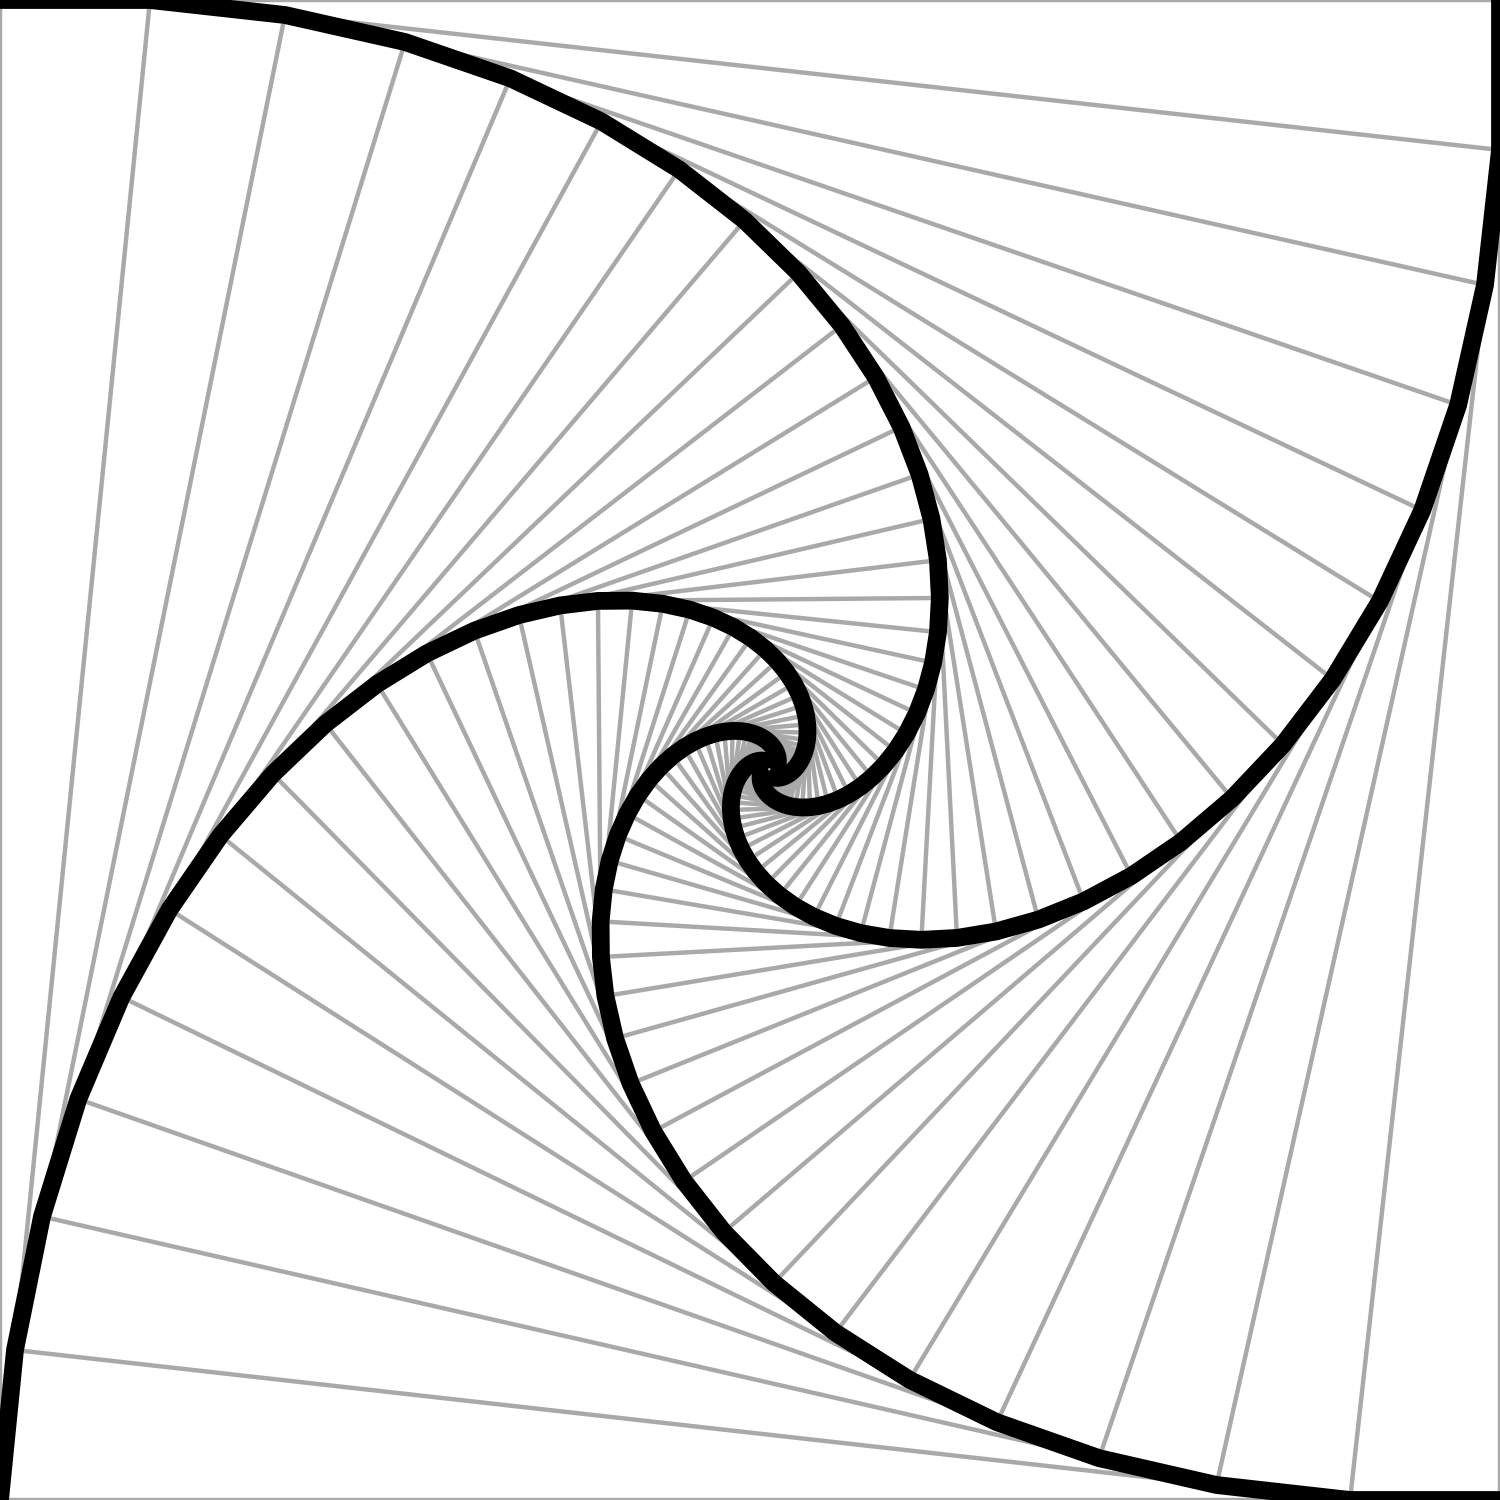 A right-handed spiral.